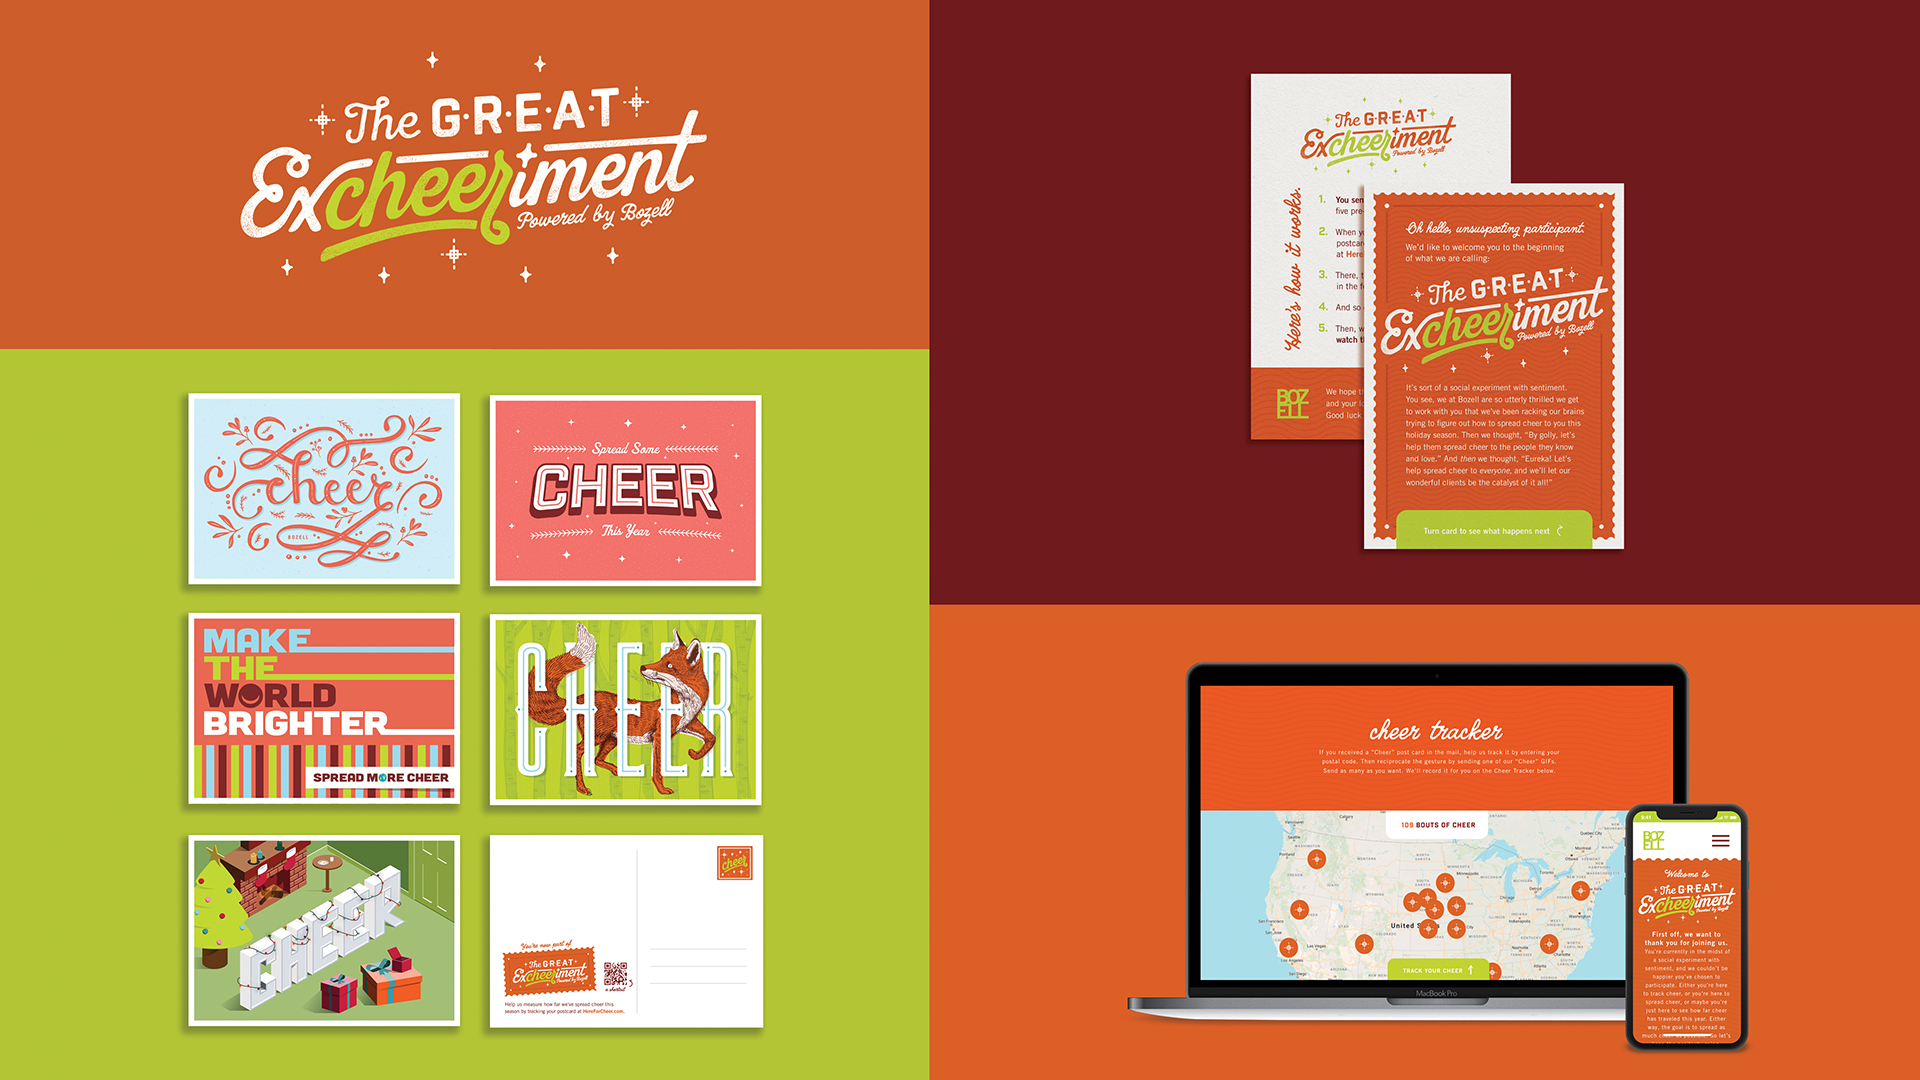 The Great Excheeriment Campaign Mosaic